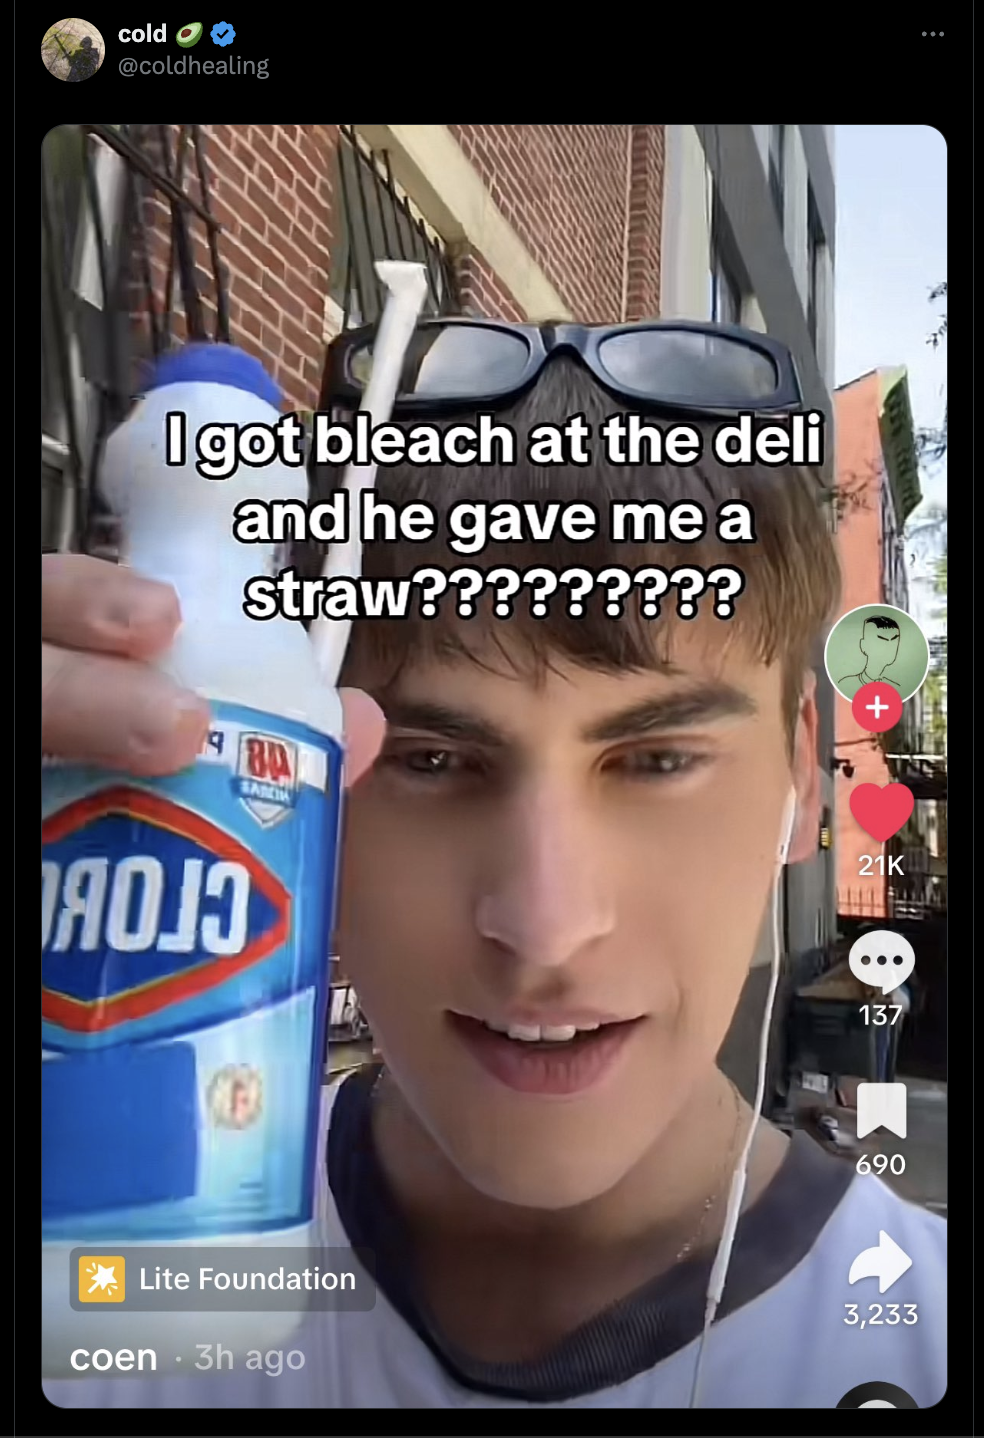 screenshot - cold I got bleach at the deli and he gave me a straw????????? Ba Lite Foundation coen 3h ago 21K 137 690 3,233